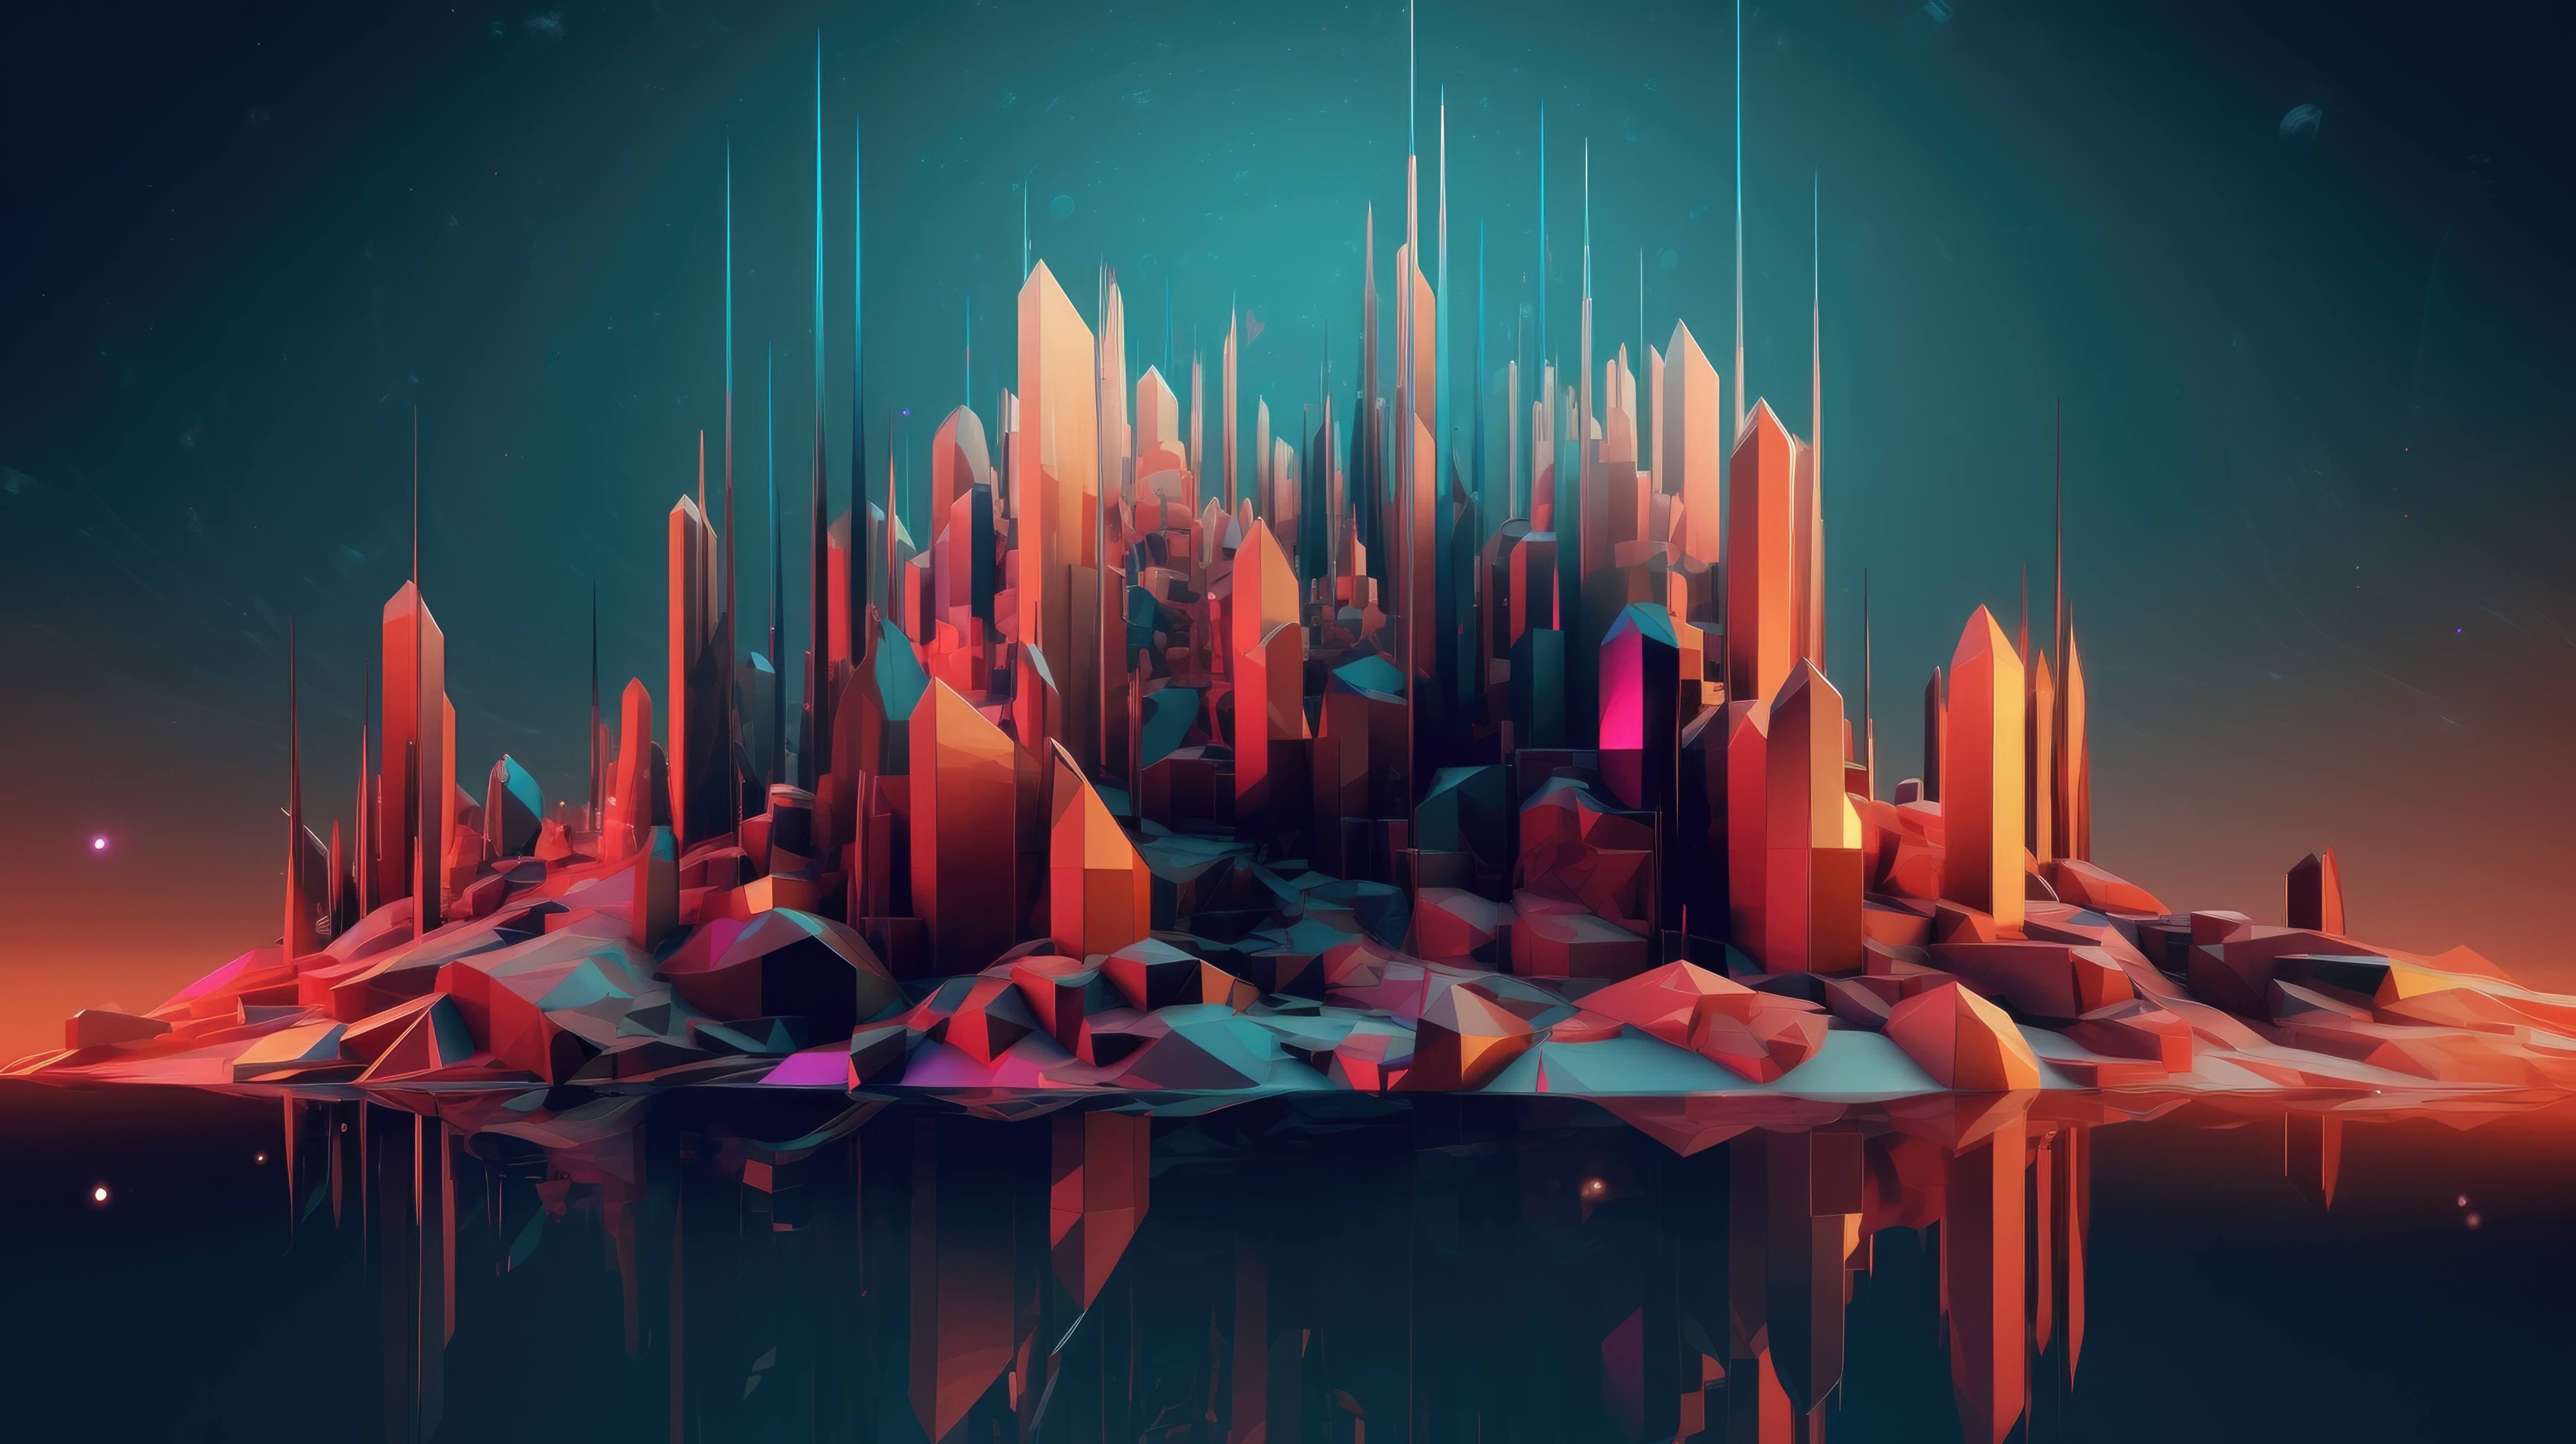 This 3D abstract scene showcases a composition of geometric shapes and digital glitches, ideal for a futuristic and glitchy wallpaper